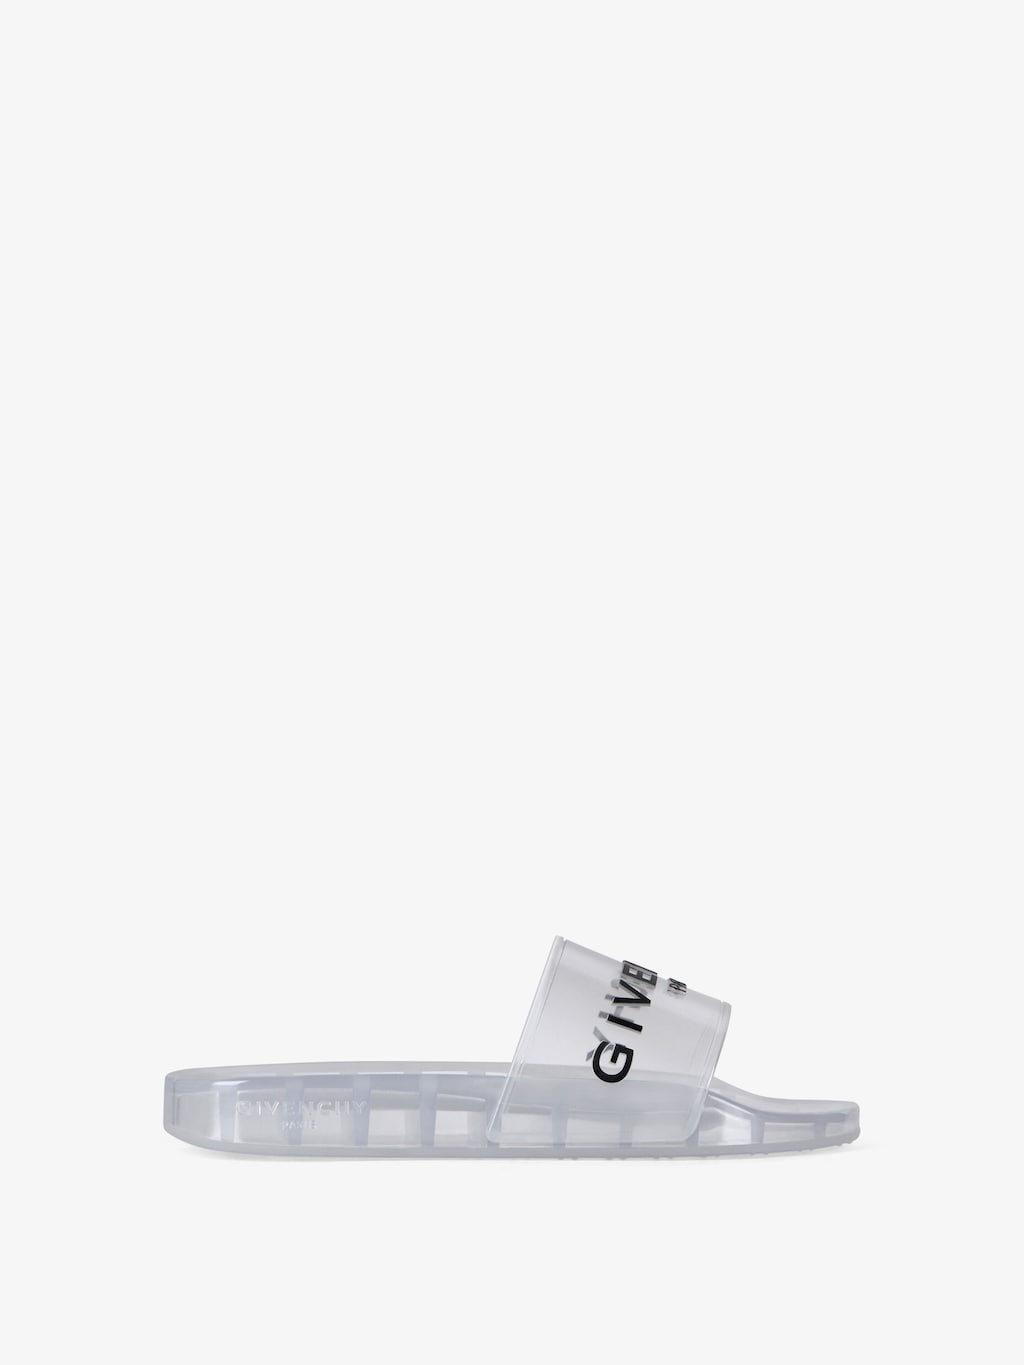 Luxury Slides & Sandals Collection for Women | Givenchy US